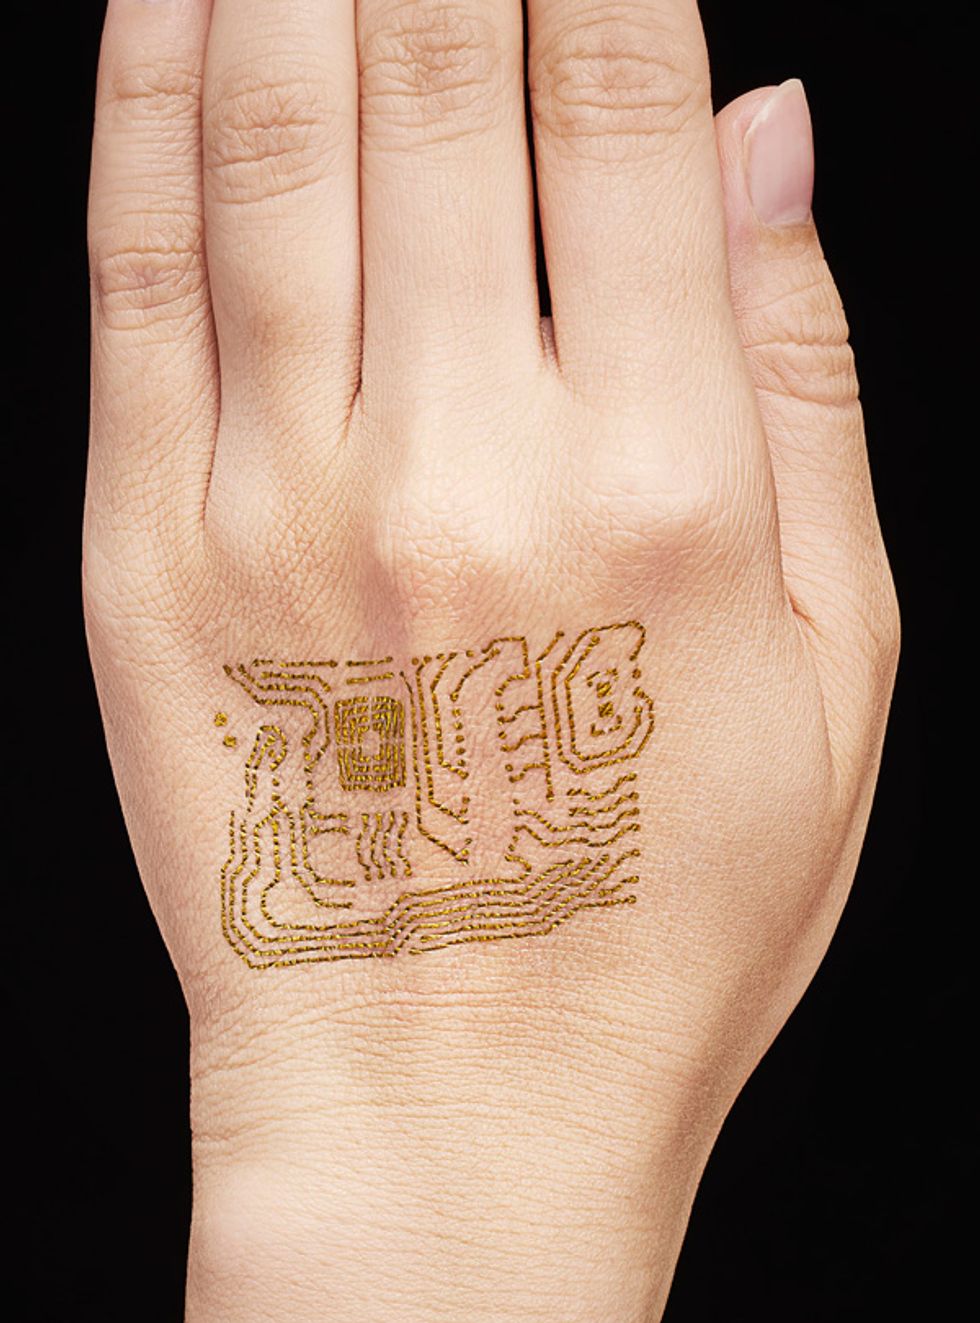 Image of hand with gold mesh for skin display.